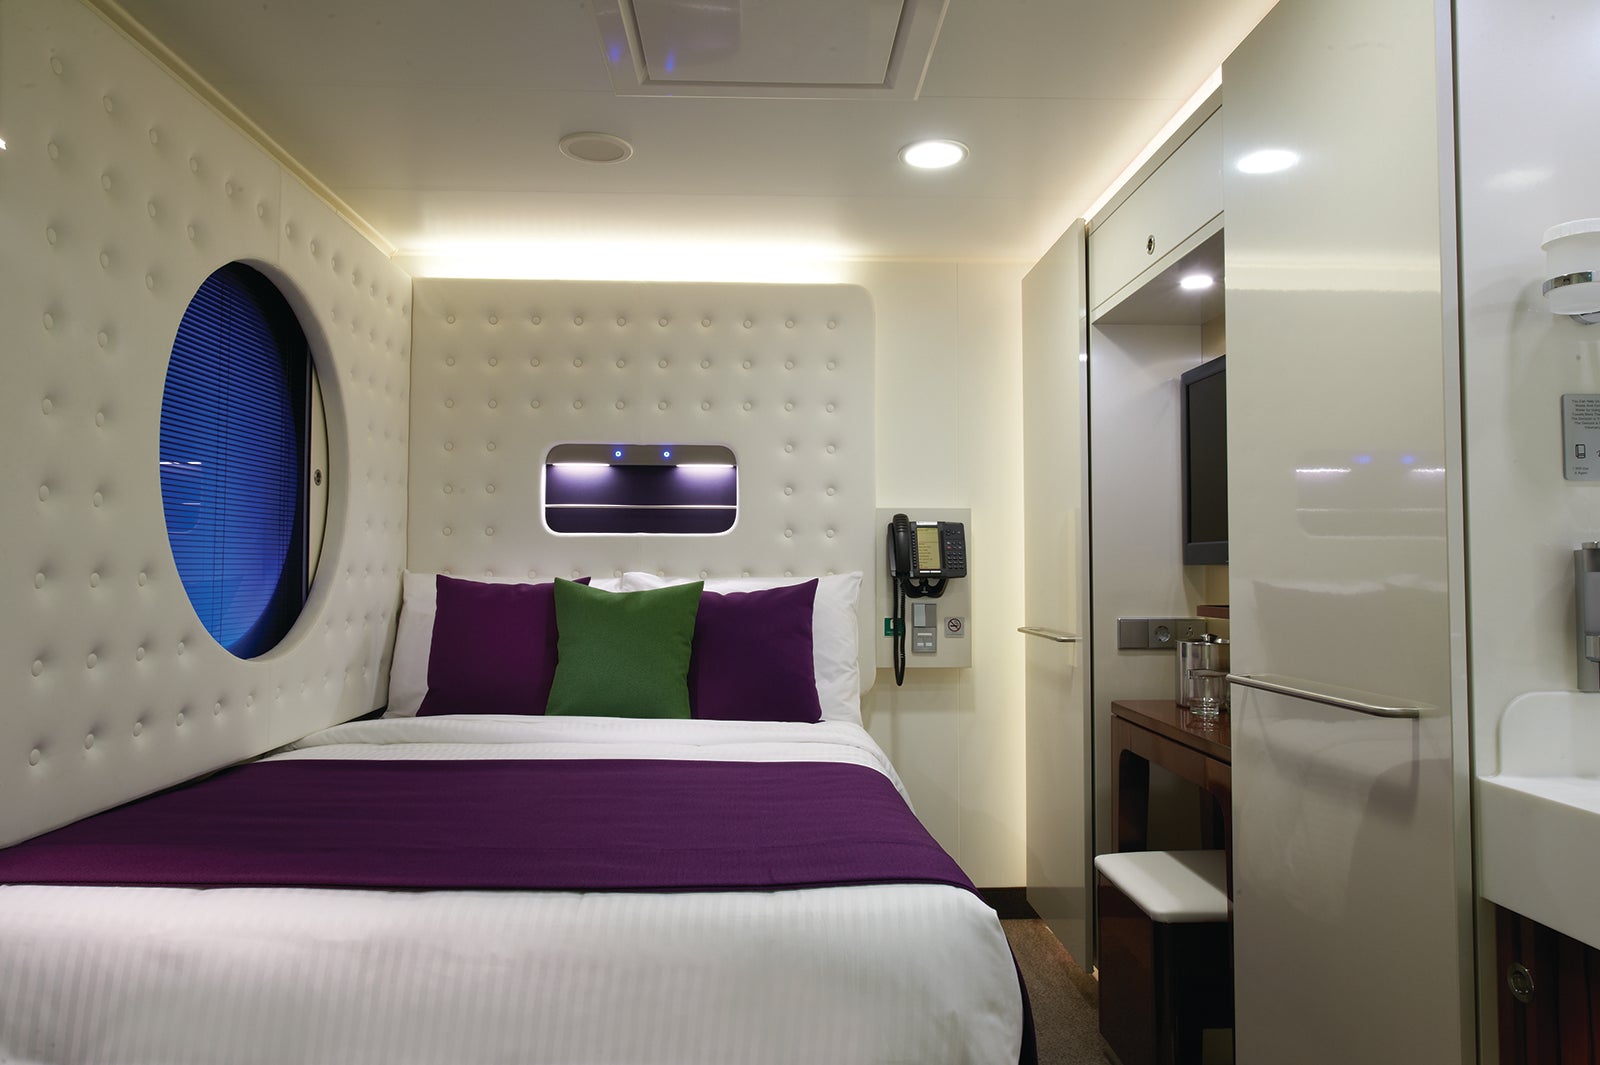 Cruise ship cabin for one person with round window facing the corridor.